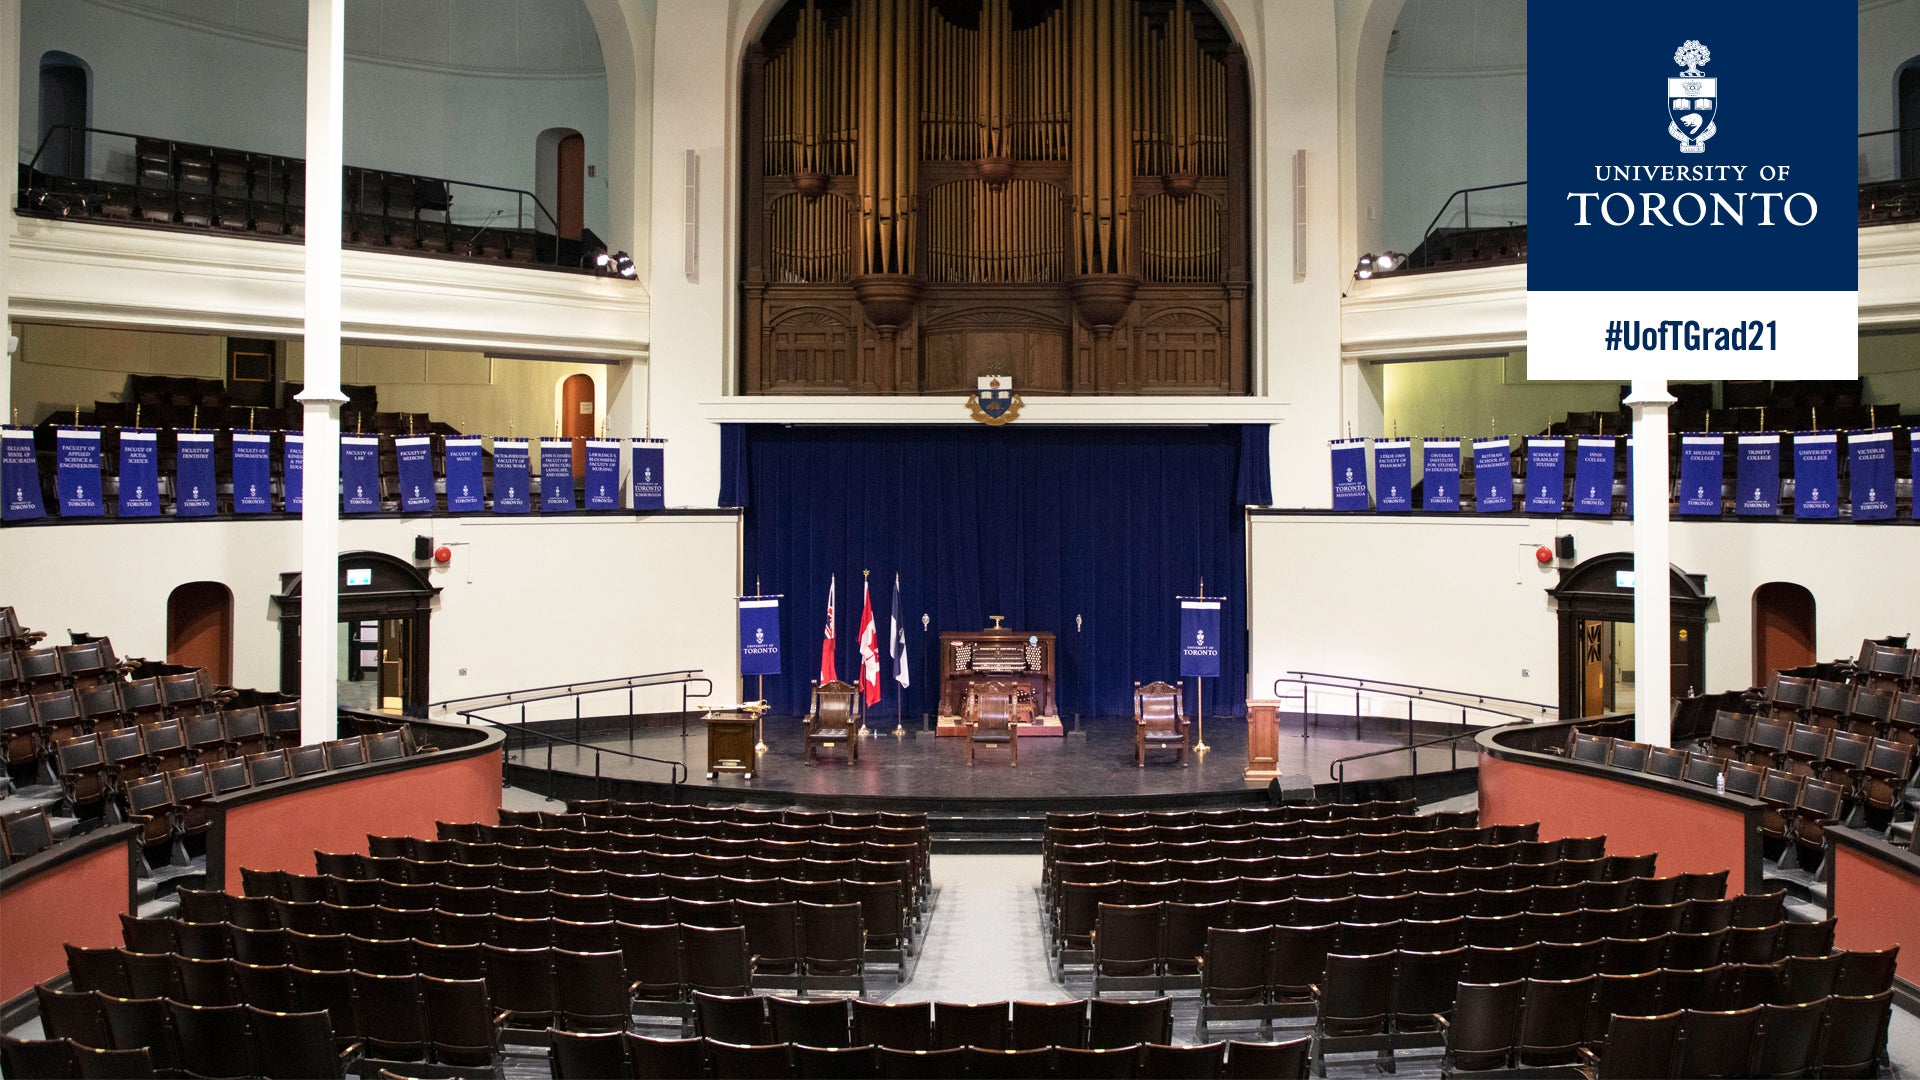 Convocation Hall fall 2021 Zoom background